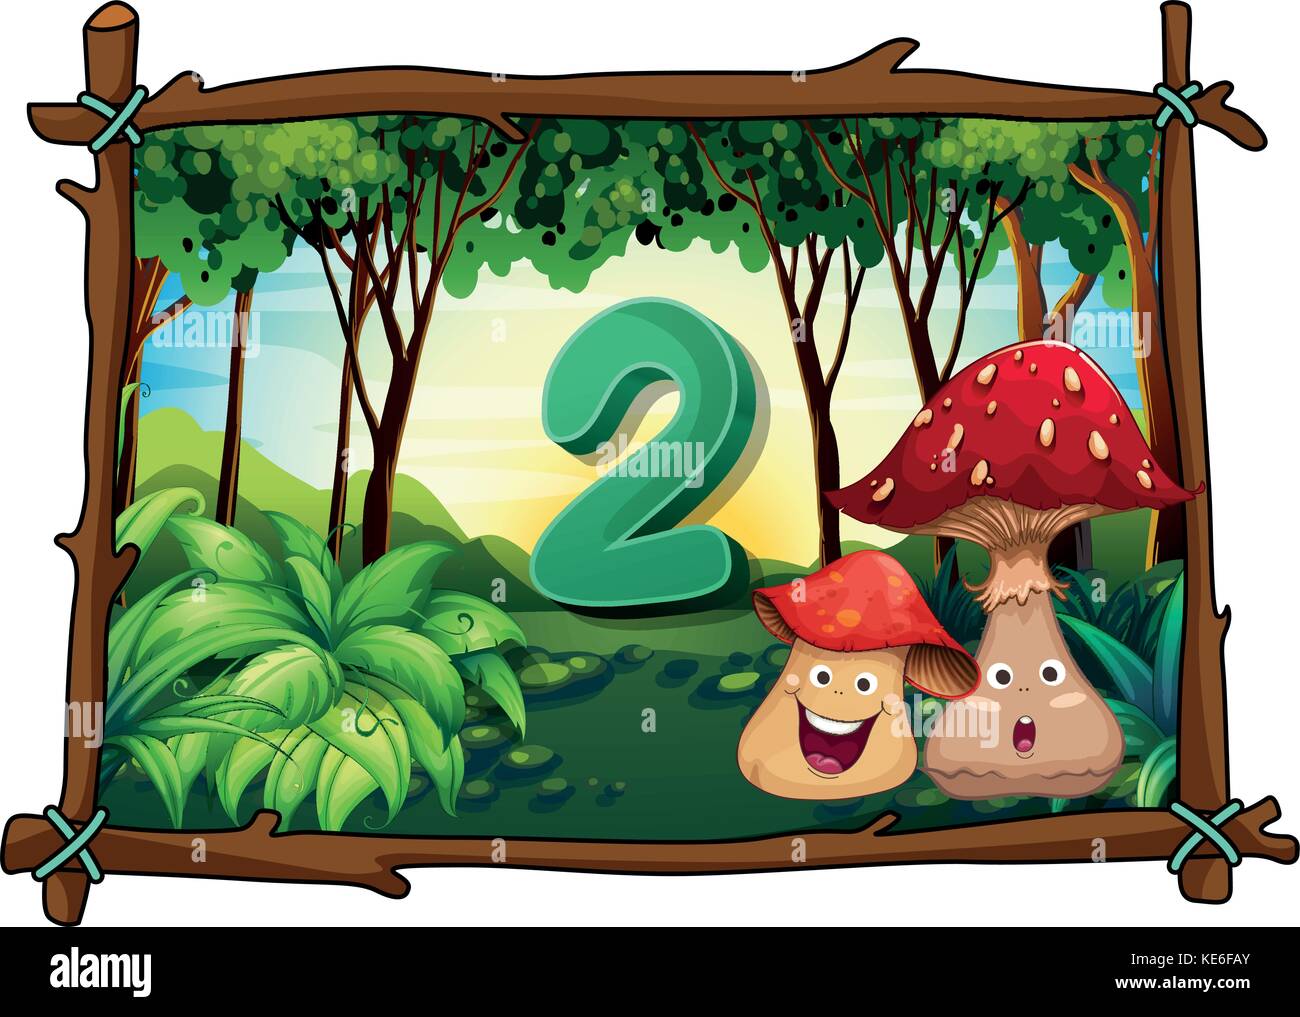 Number two with 2 mushrooms in the forest illustration Stock Vector